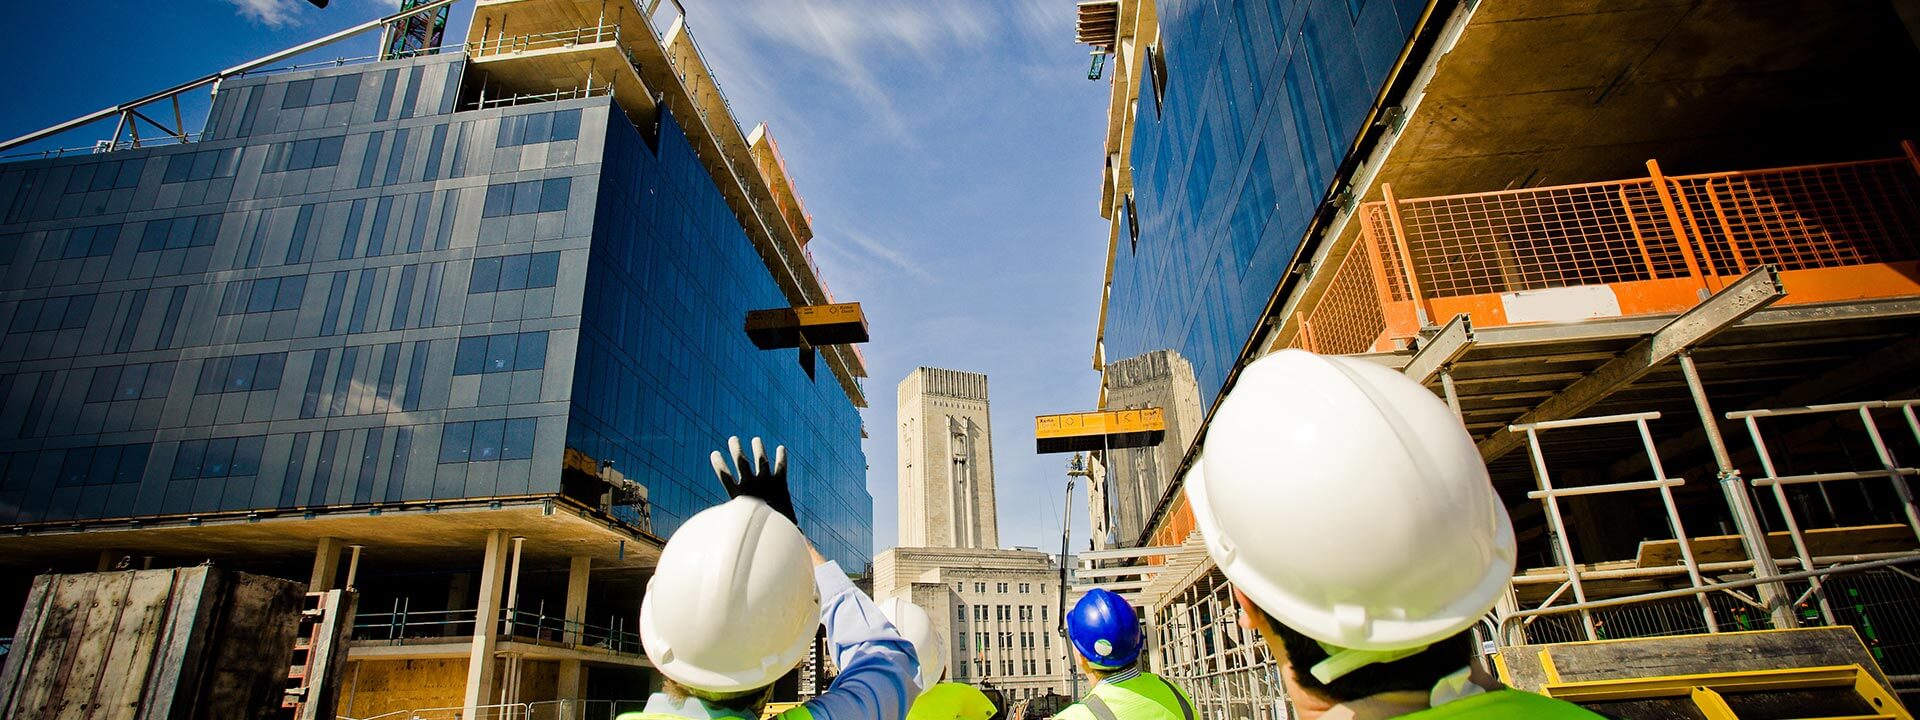 Construction workers looking up at a building site above